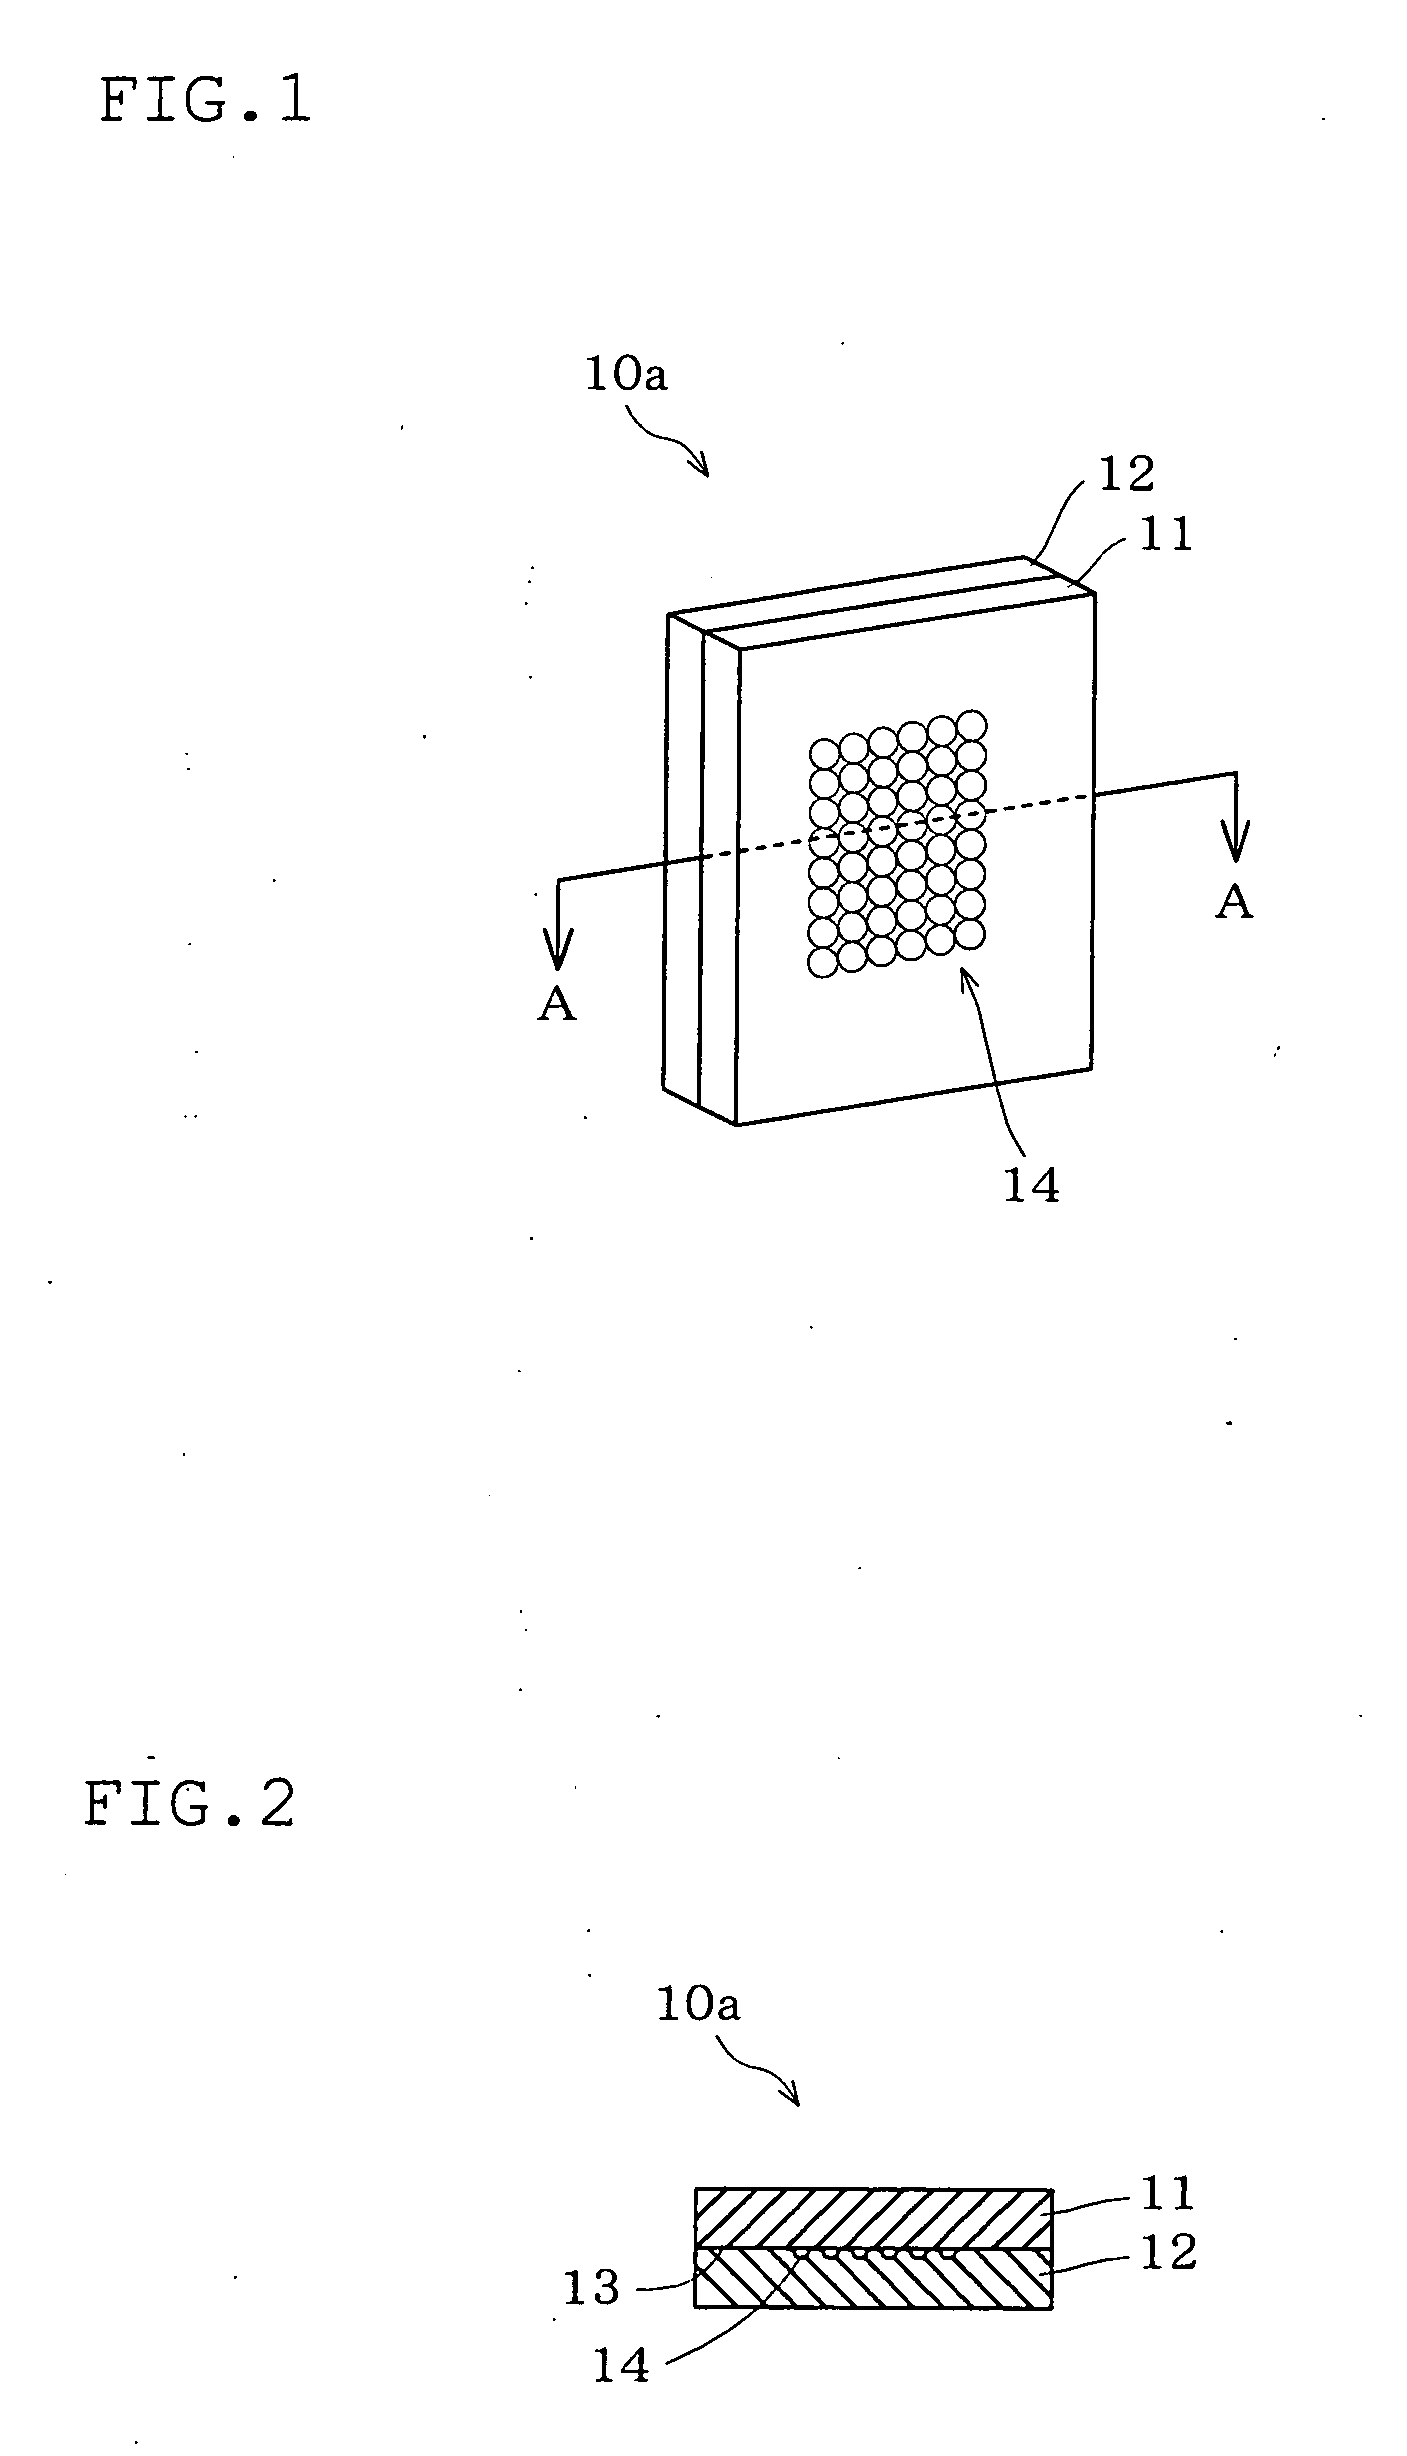 Structure, method of forming structure, method of laser processing, and method of discriminating between true and false objects